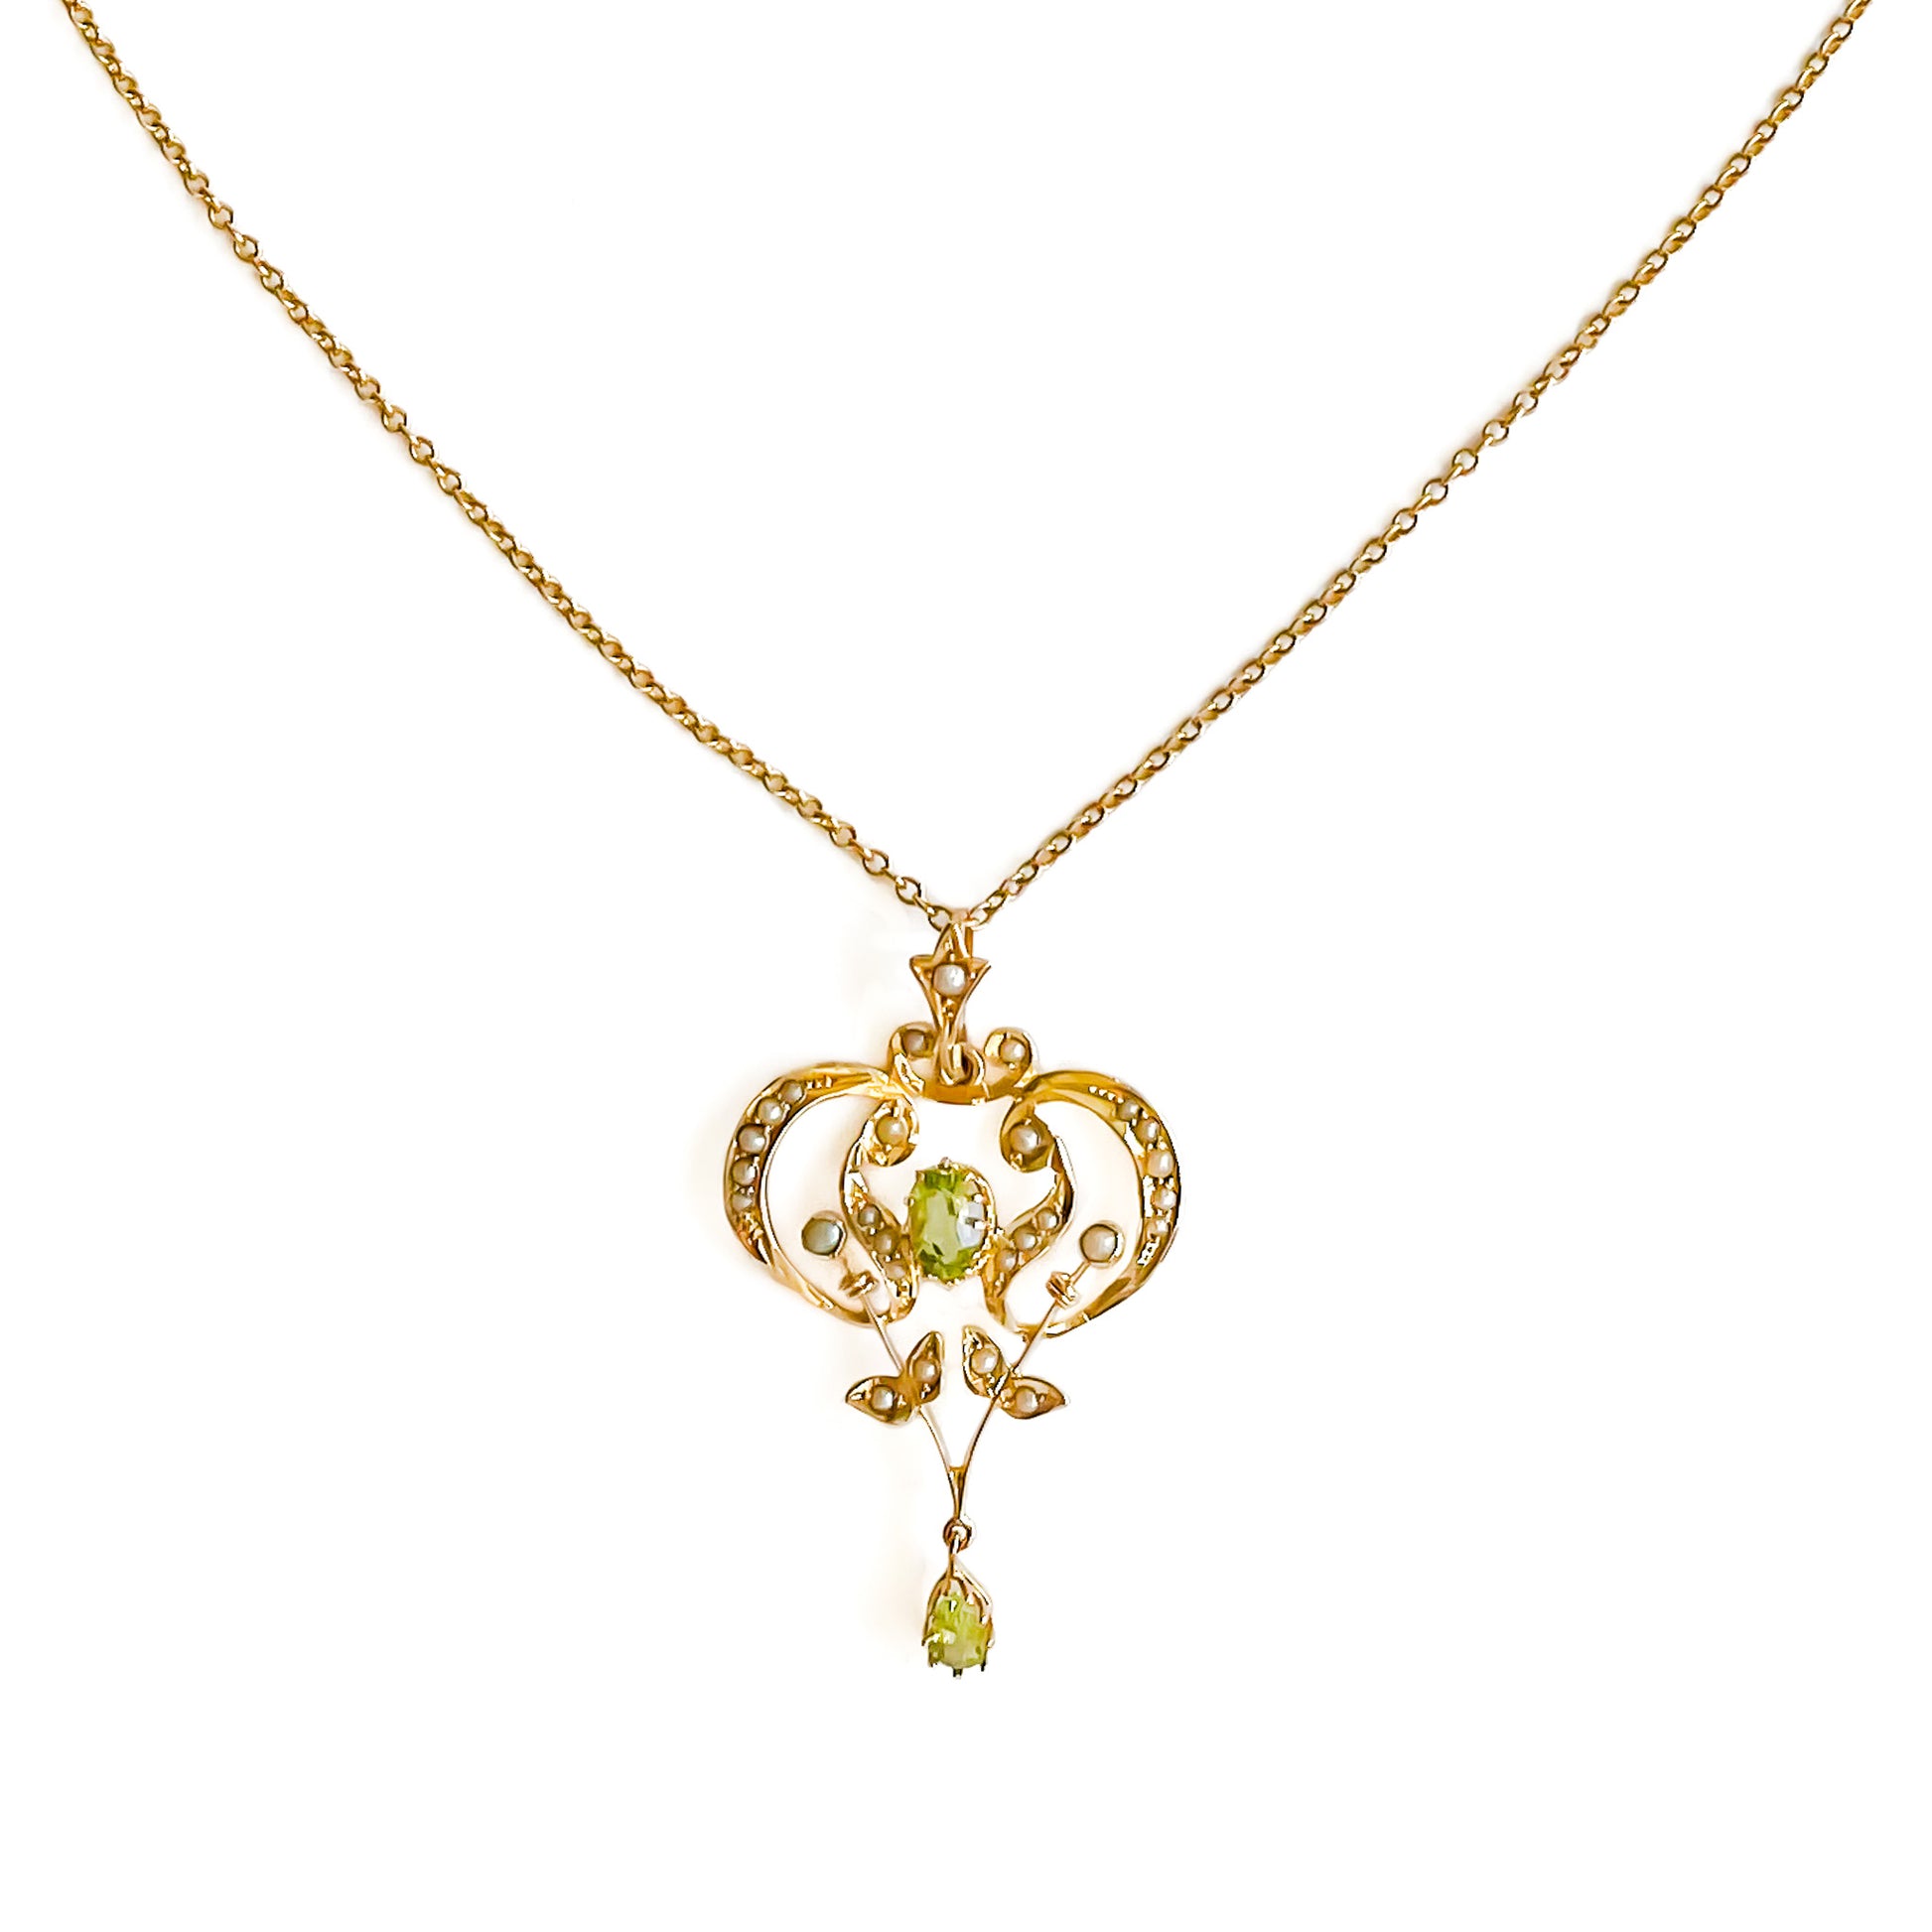 Exquisite Edwardian 9ct yellow gold pendant set with two faceted peridots and twenty-seven seed pearls.